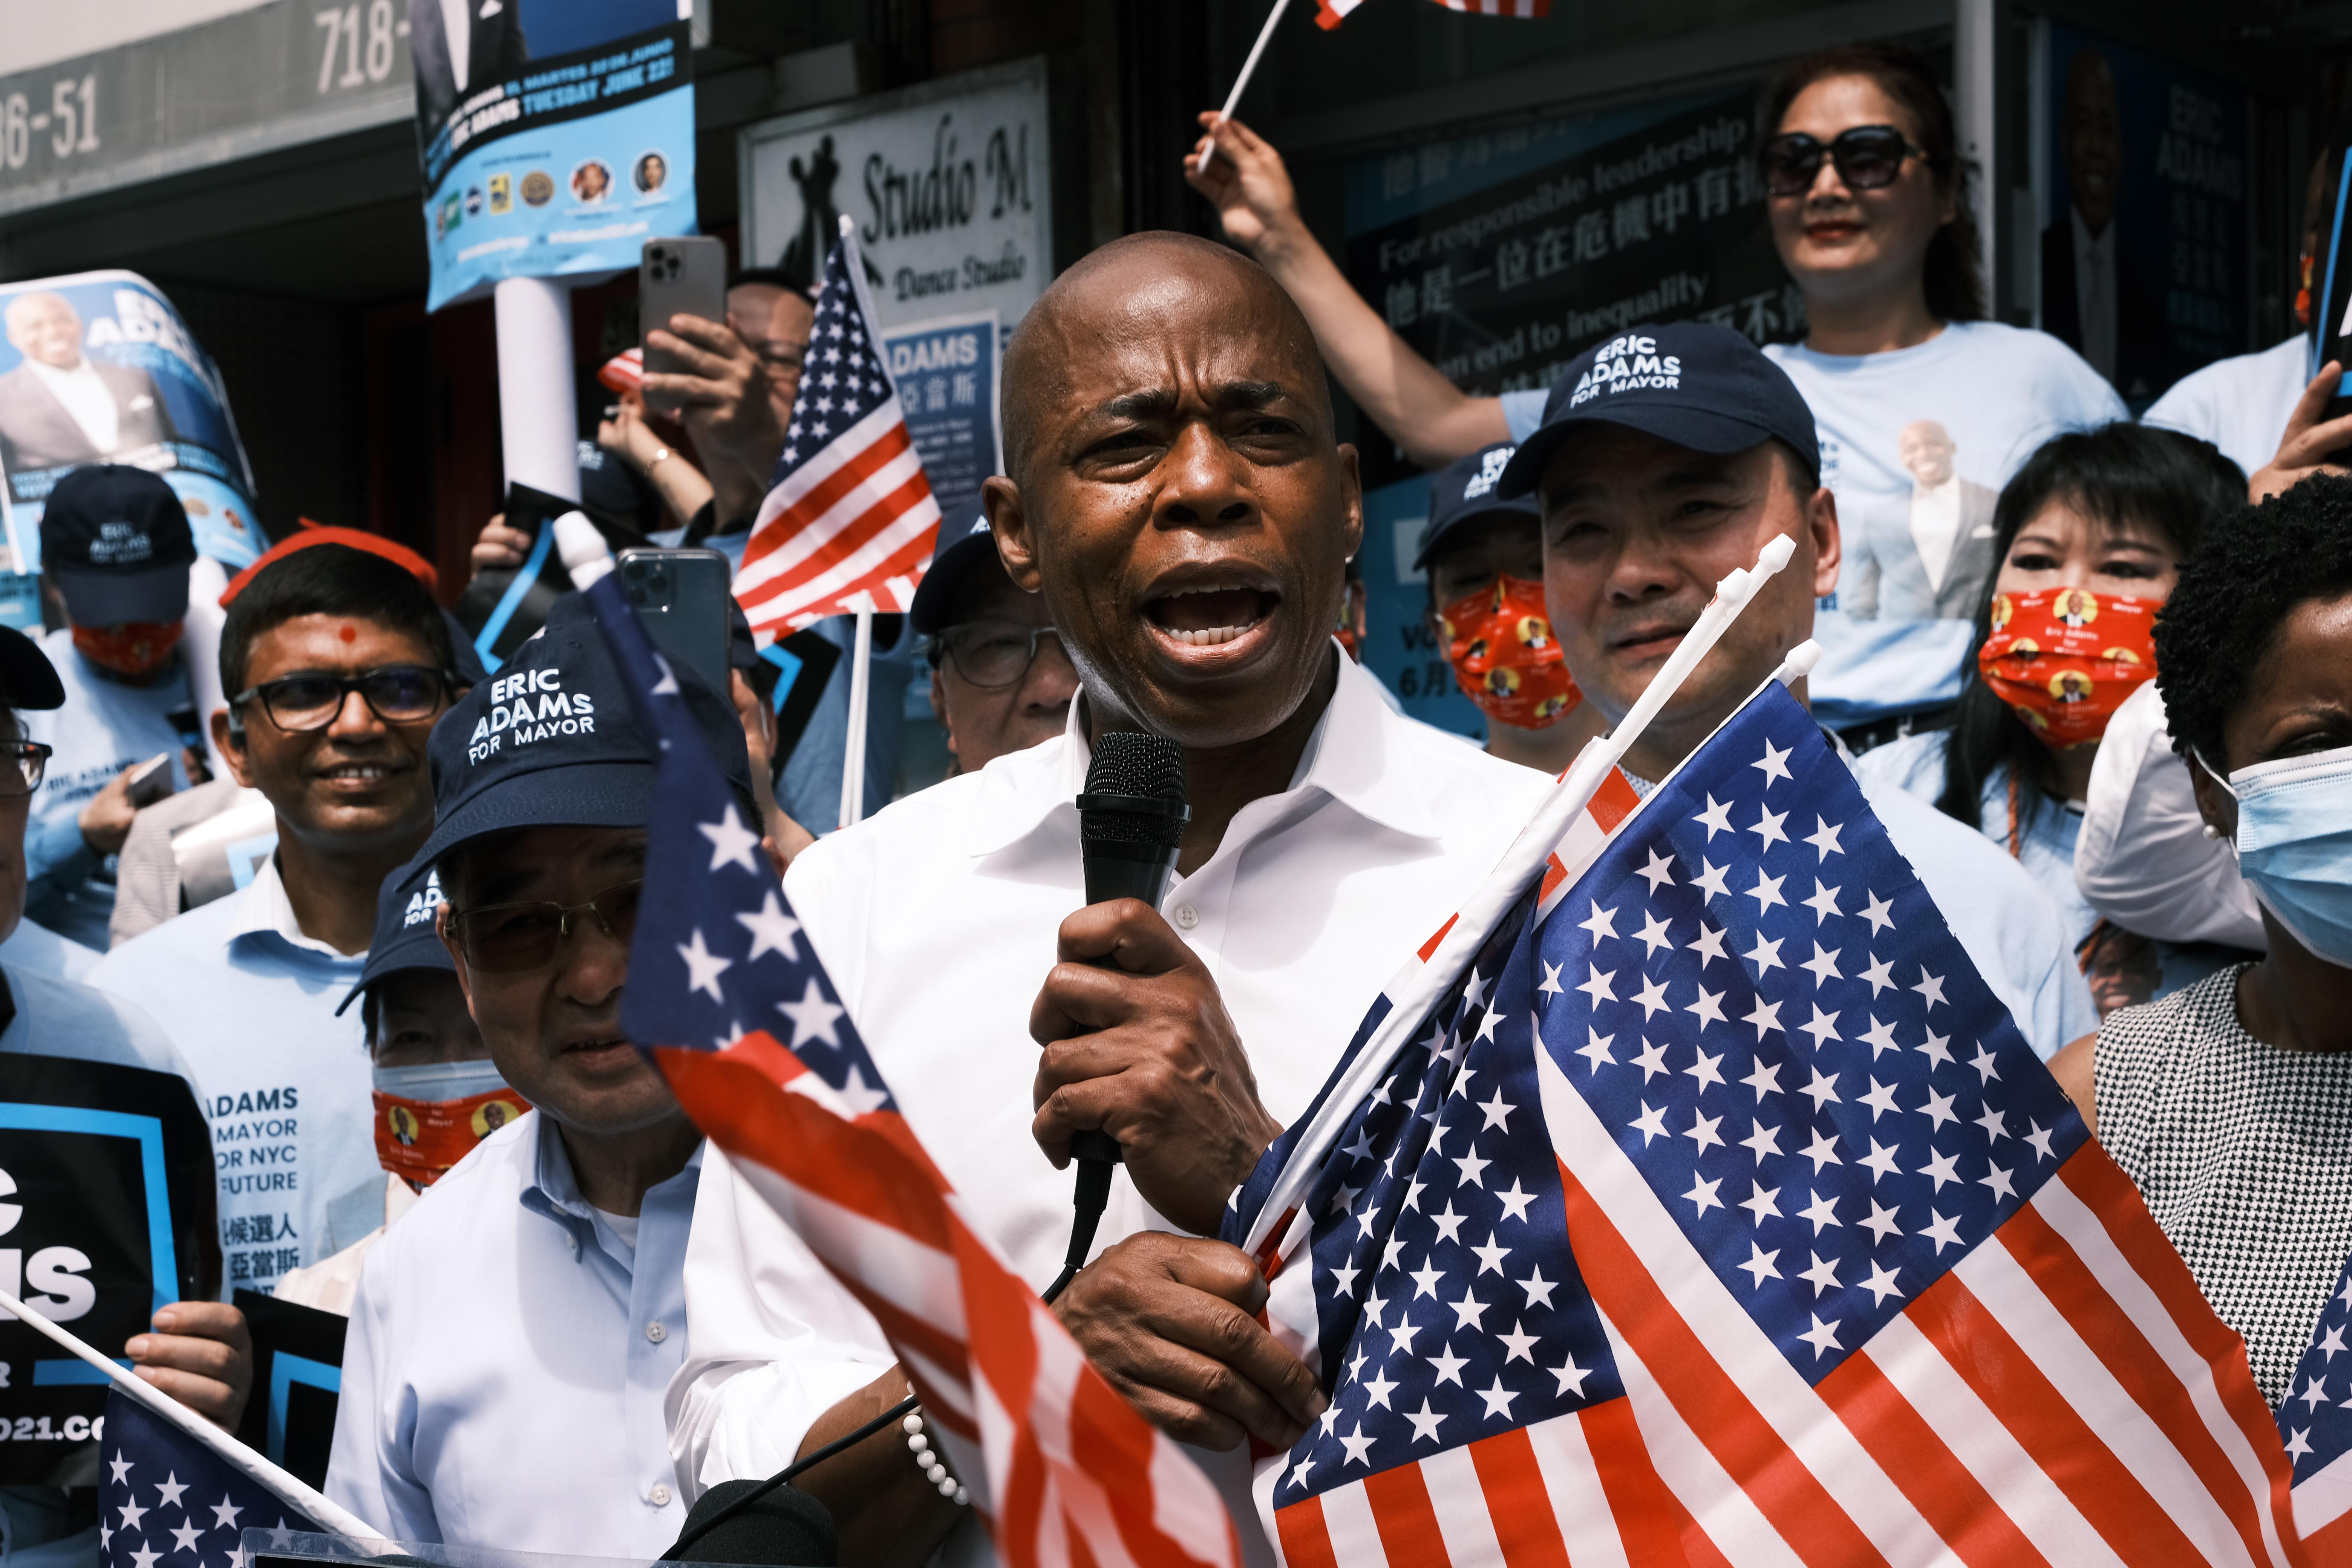 Brooklyn Borough President Eric Adams appears in Flushing, Queens to open a new campaign office on June 8, 2021 in the Queens borough of  New York City. He's seen surrounded by a crowd of supporters who are waving American flags.